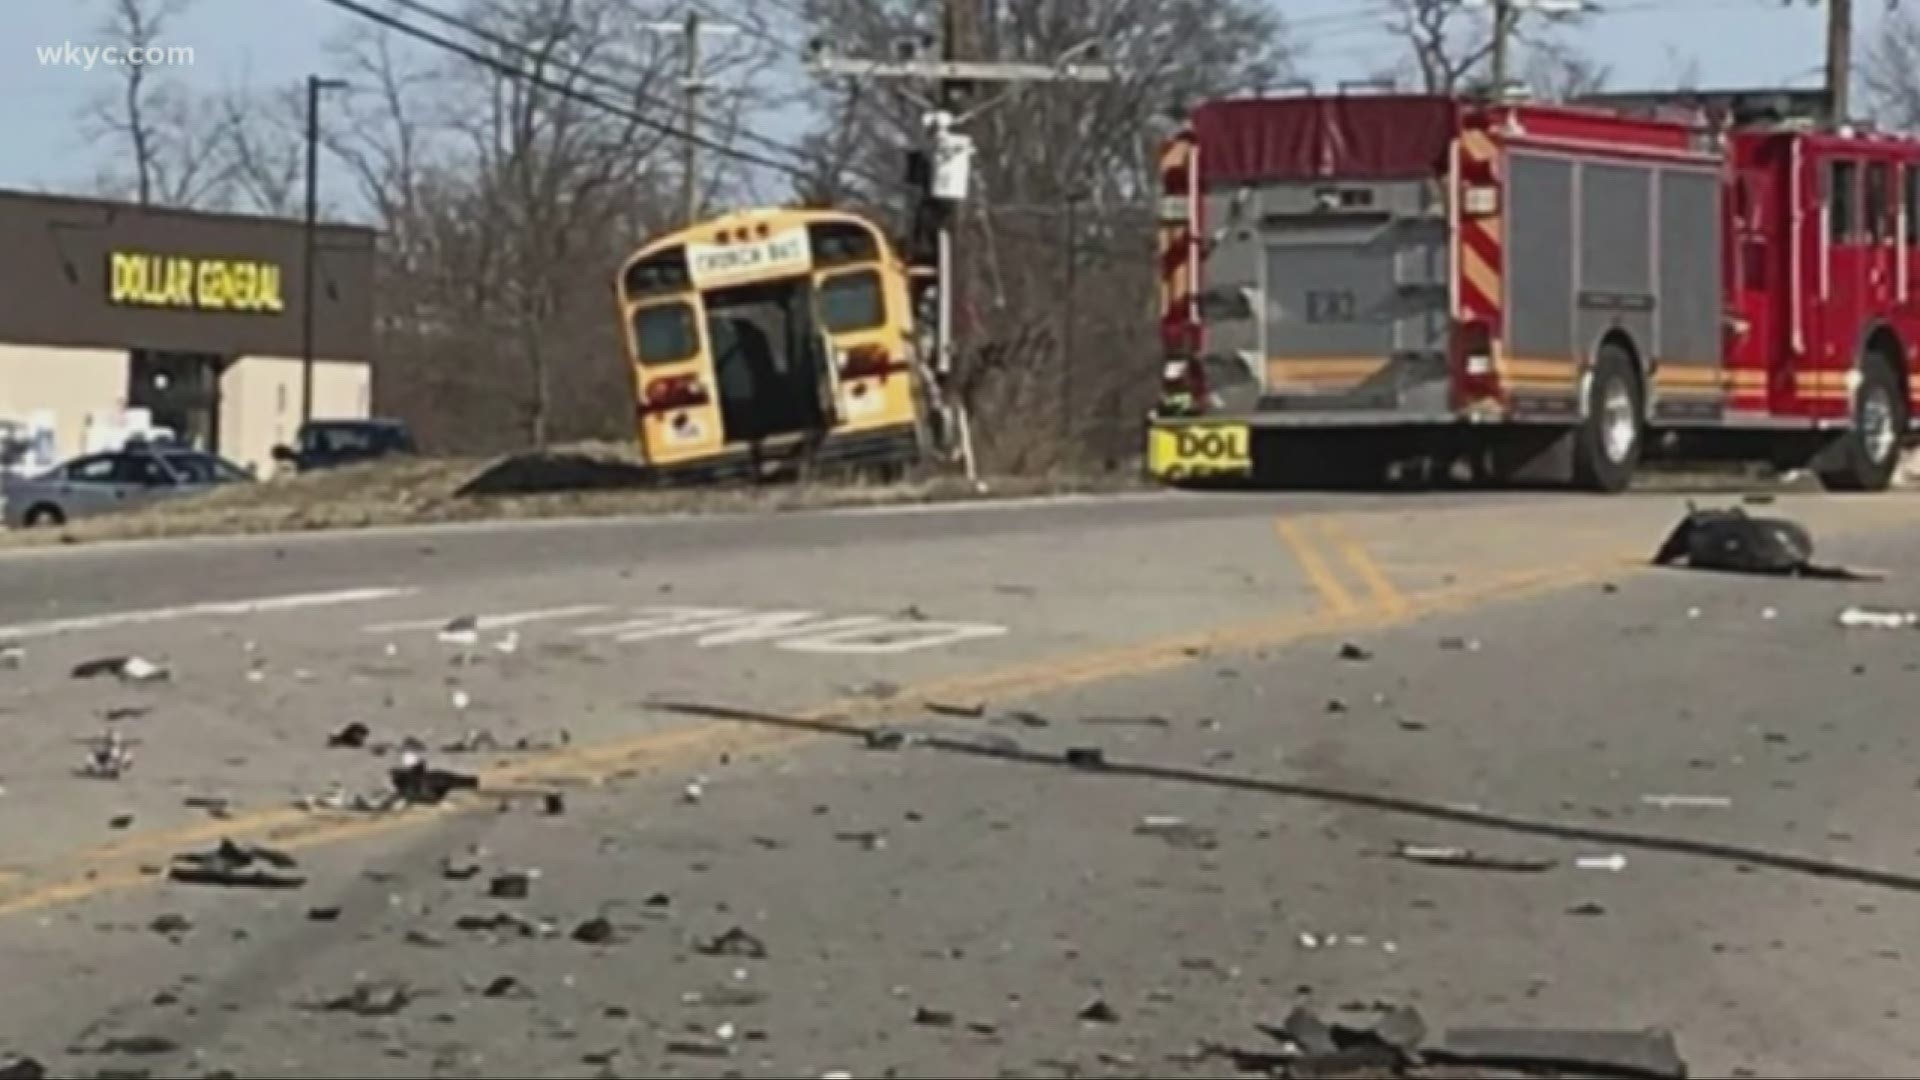 One person dead after crash involving church bus carrying 30 children